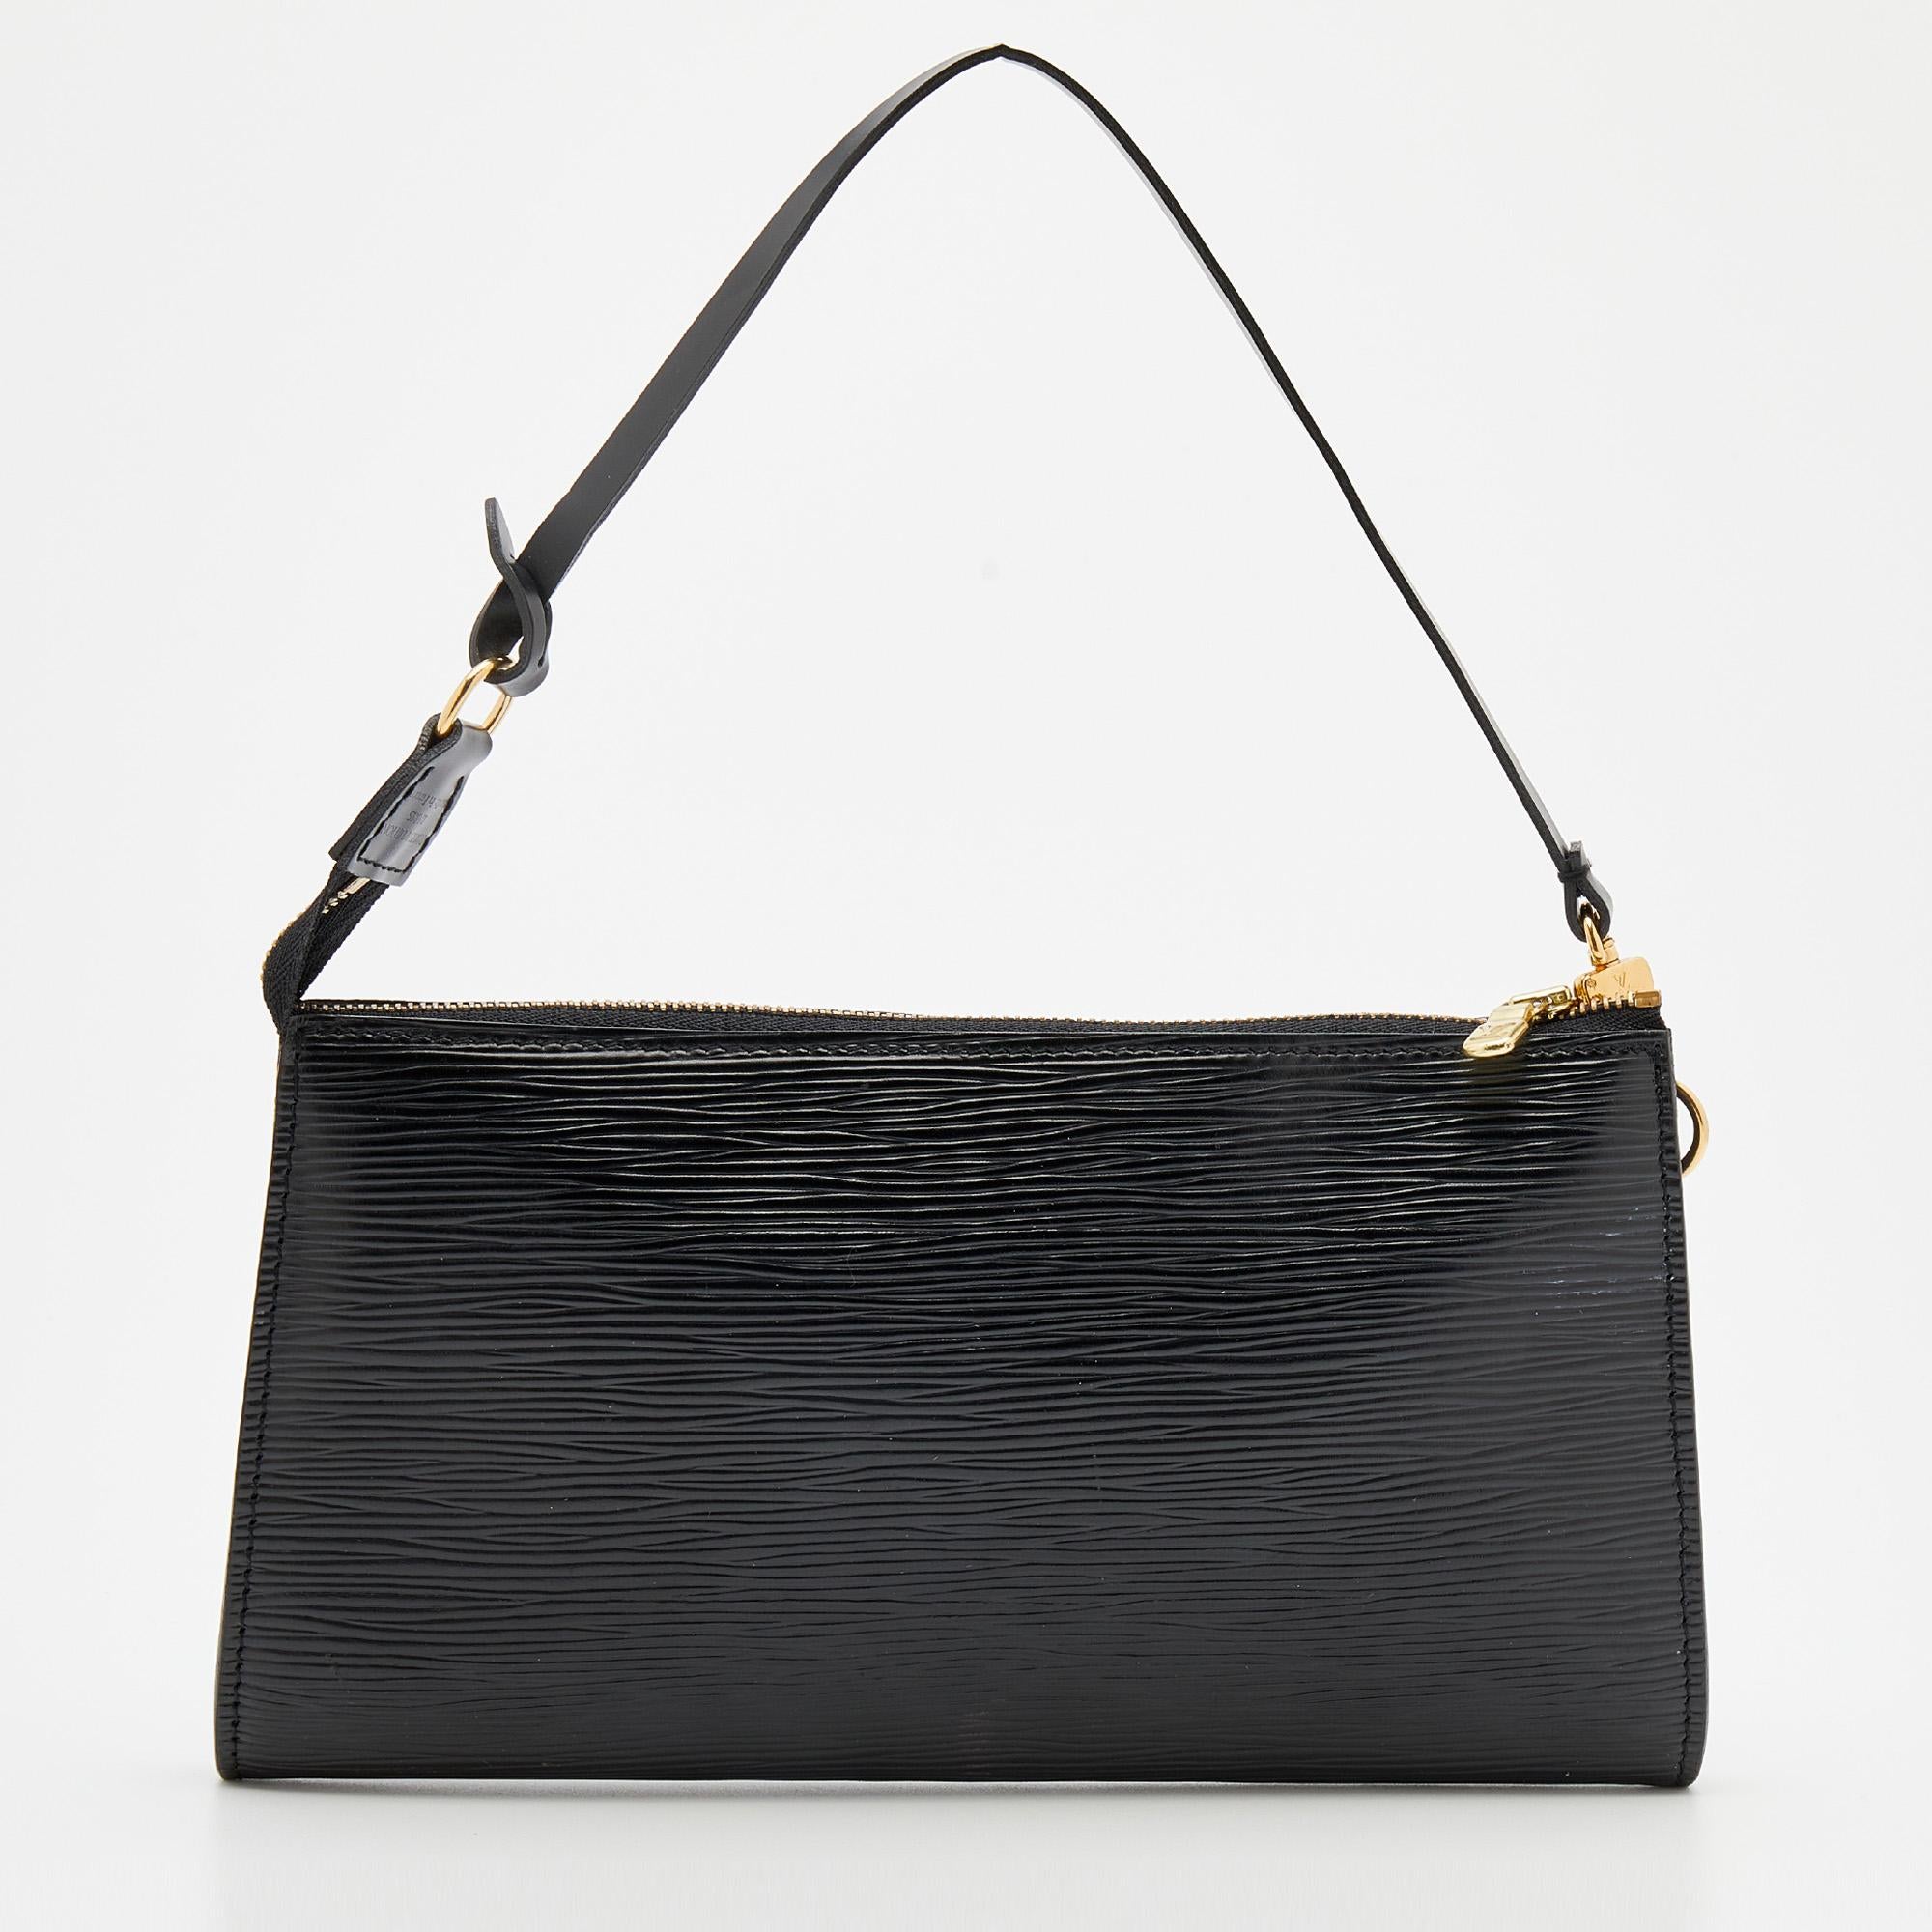 Featuring a black epi leather exterior, this adorable LV pochette is accented with gold-tone hardware. It is finished with a single handle and a zip closure that opens to a well-sized interior. Get this sleek creation today!